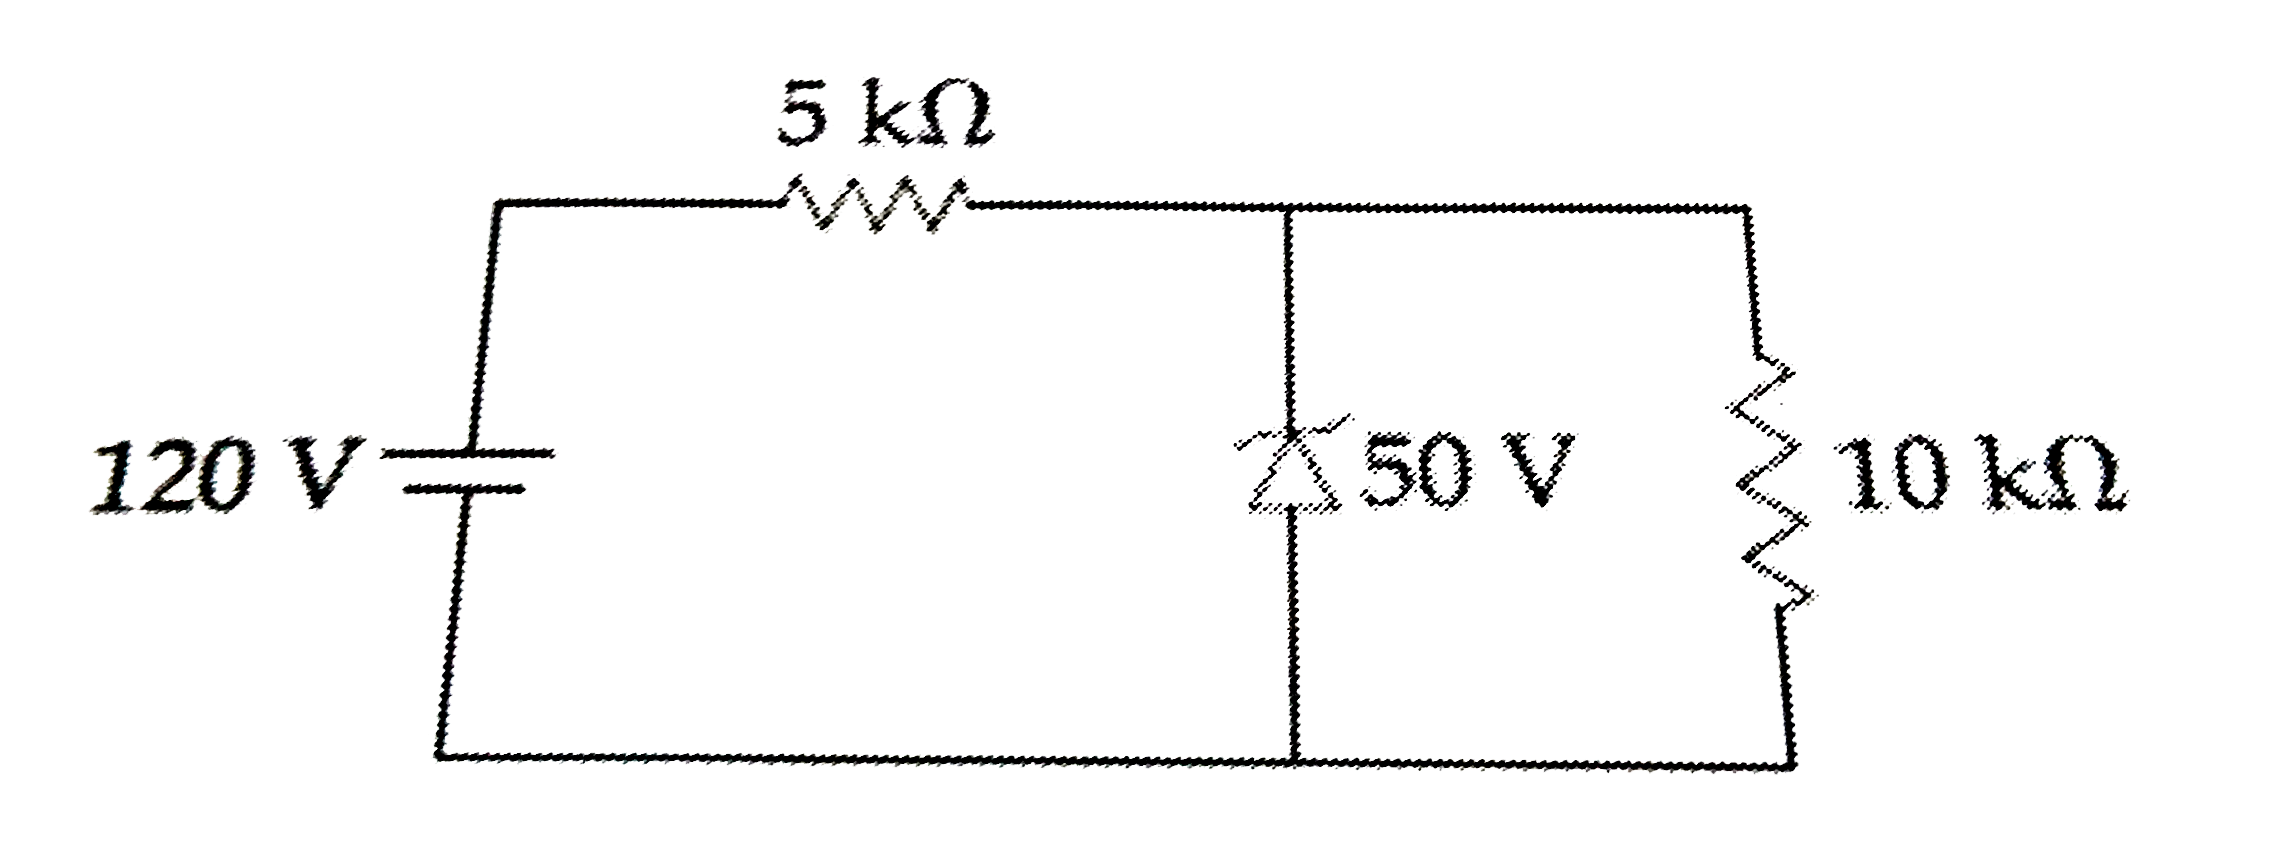 For the circuit shown below, the current  through the Zener diode is